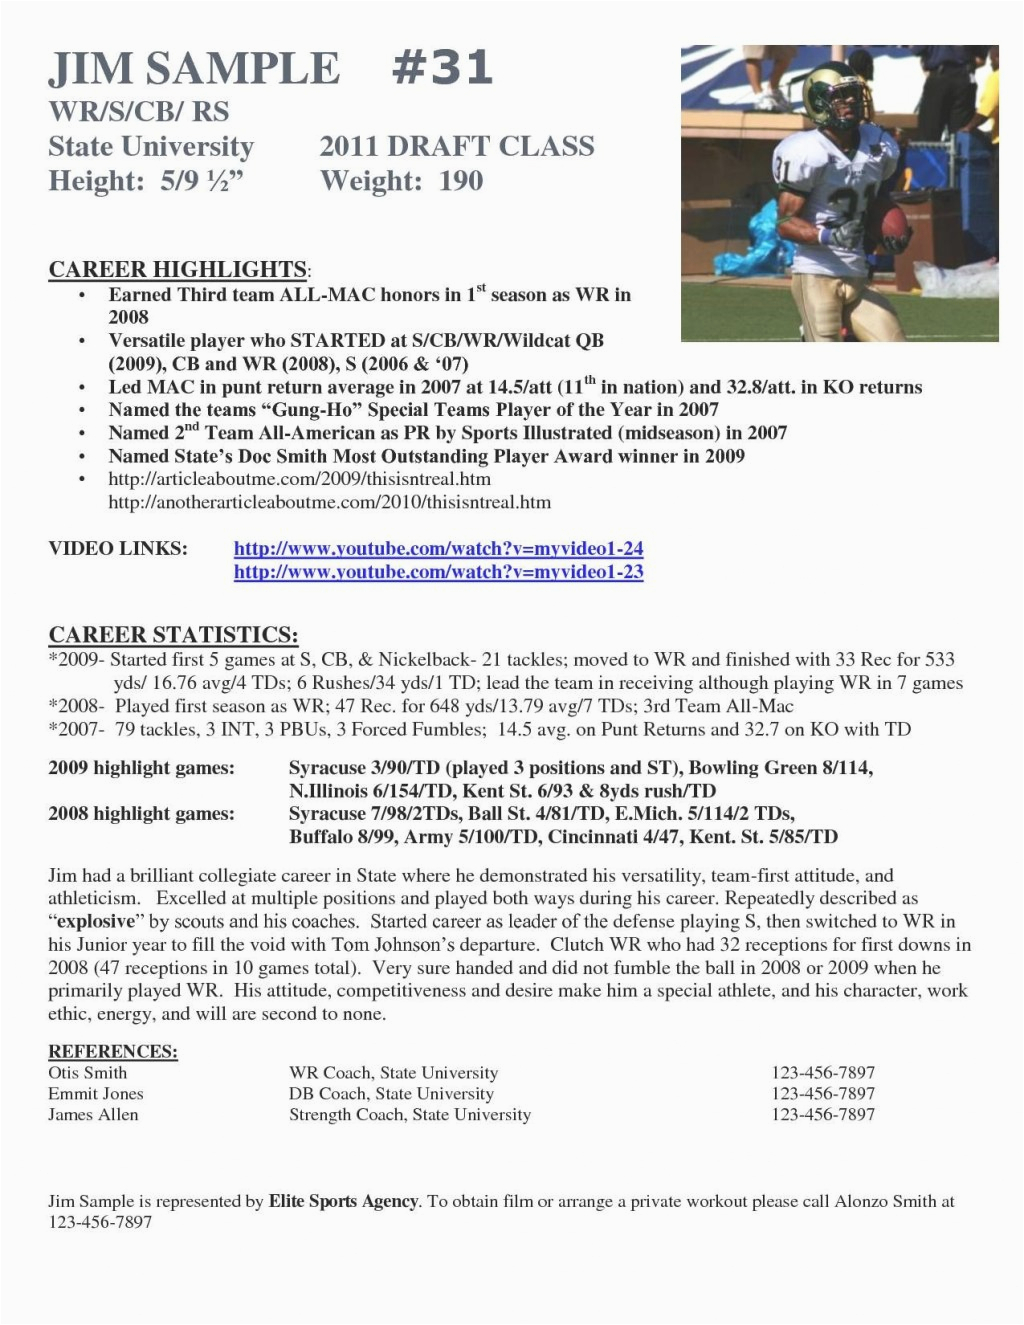 Sample Resume Hockey Player Profile Template the Best Sample Resume Hockey Player Profile Template for